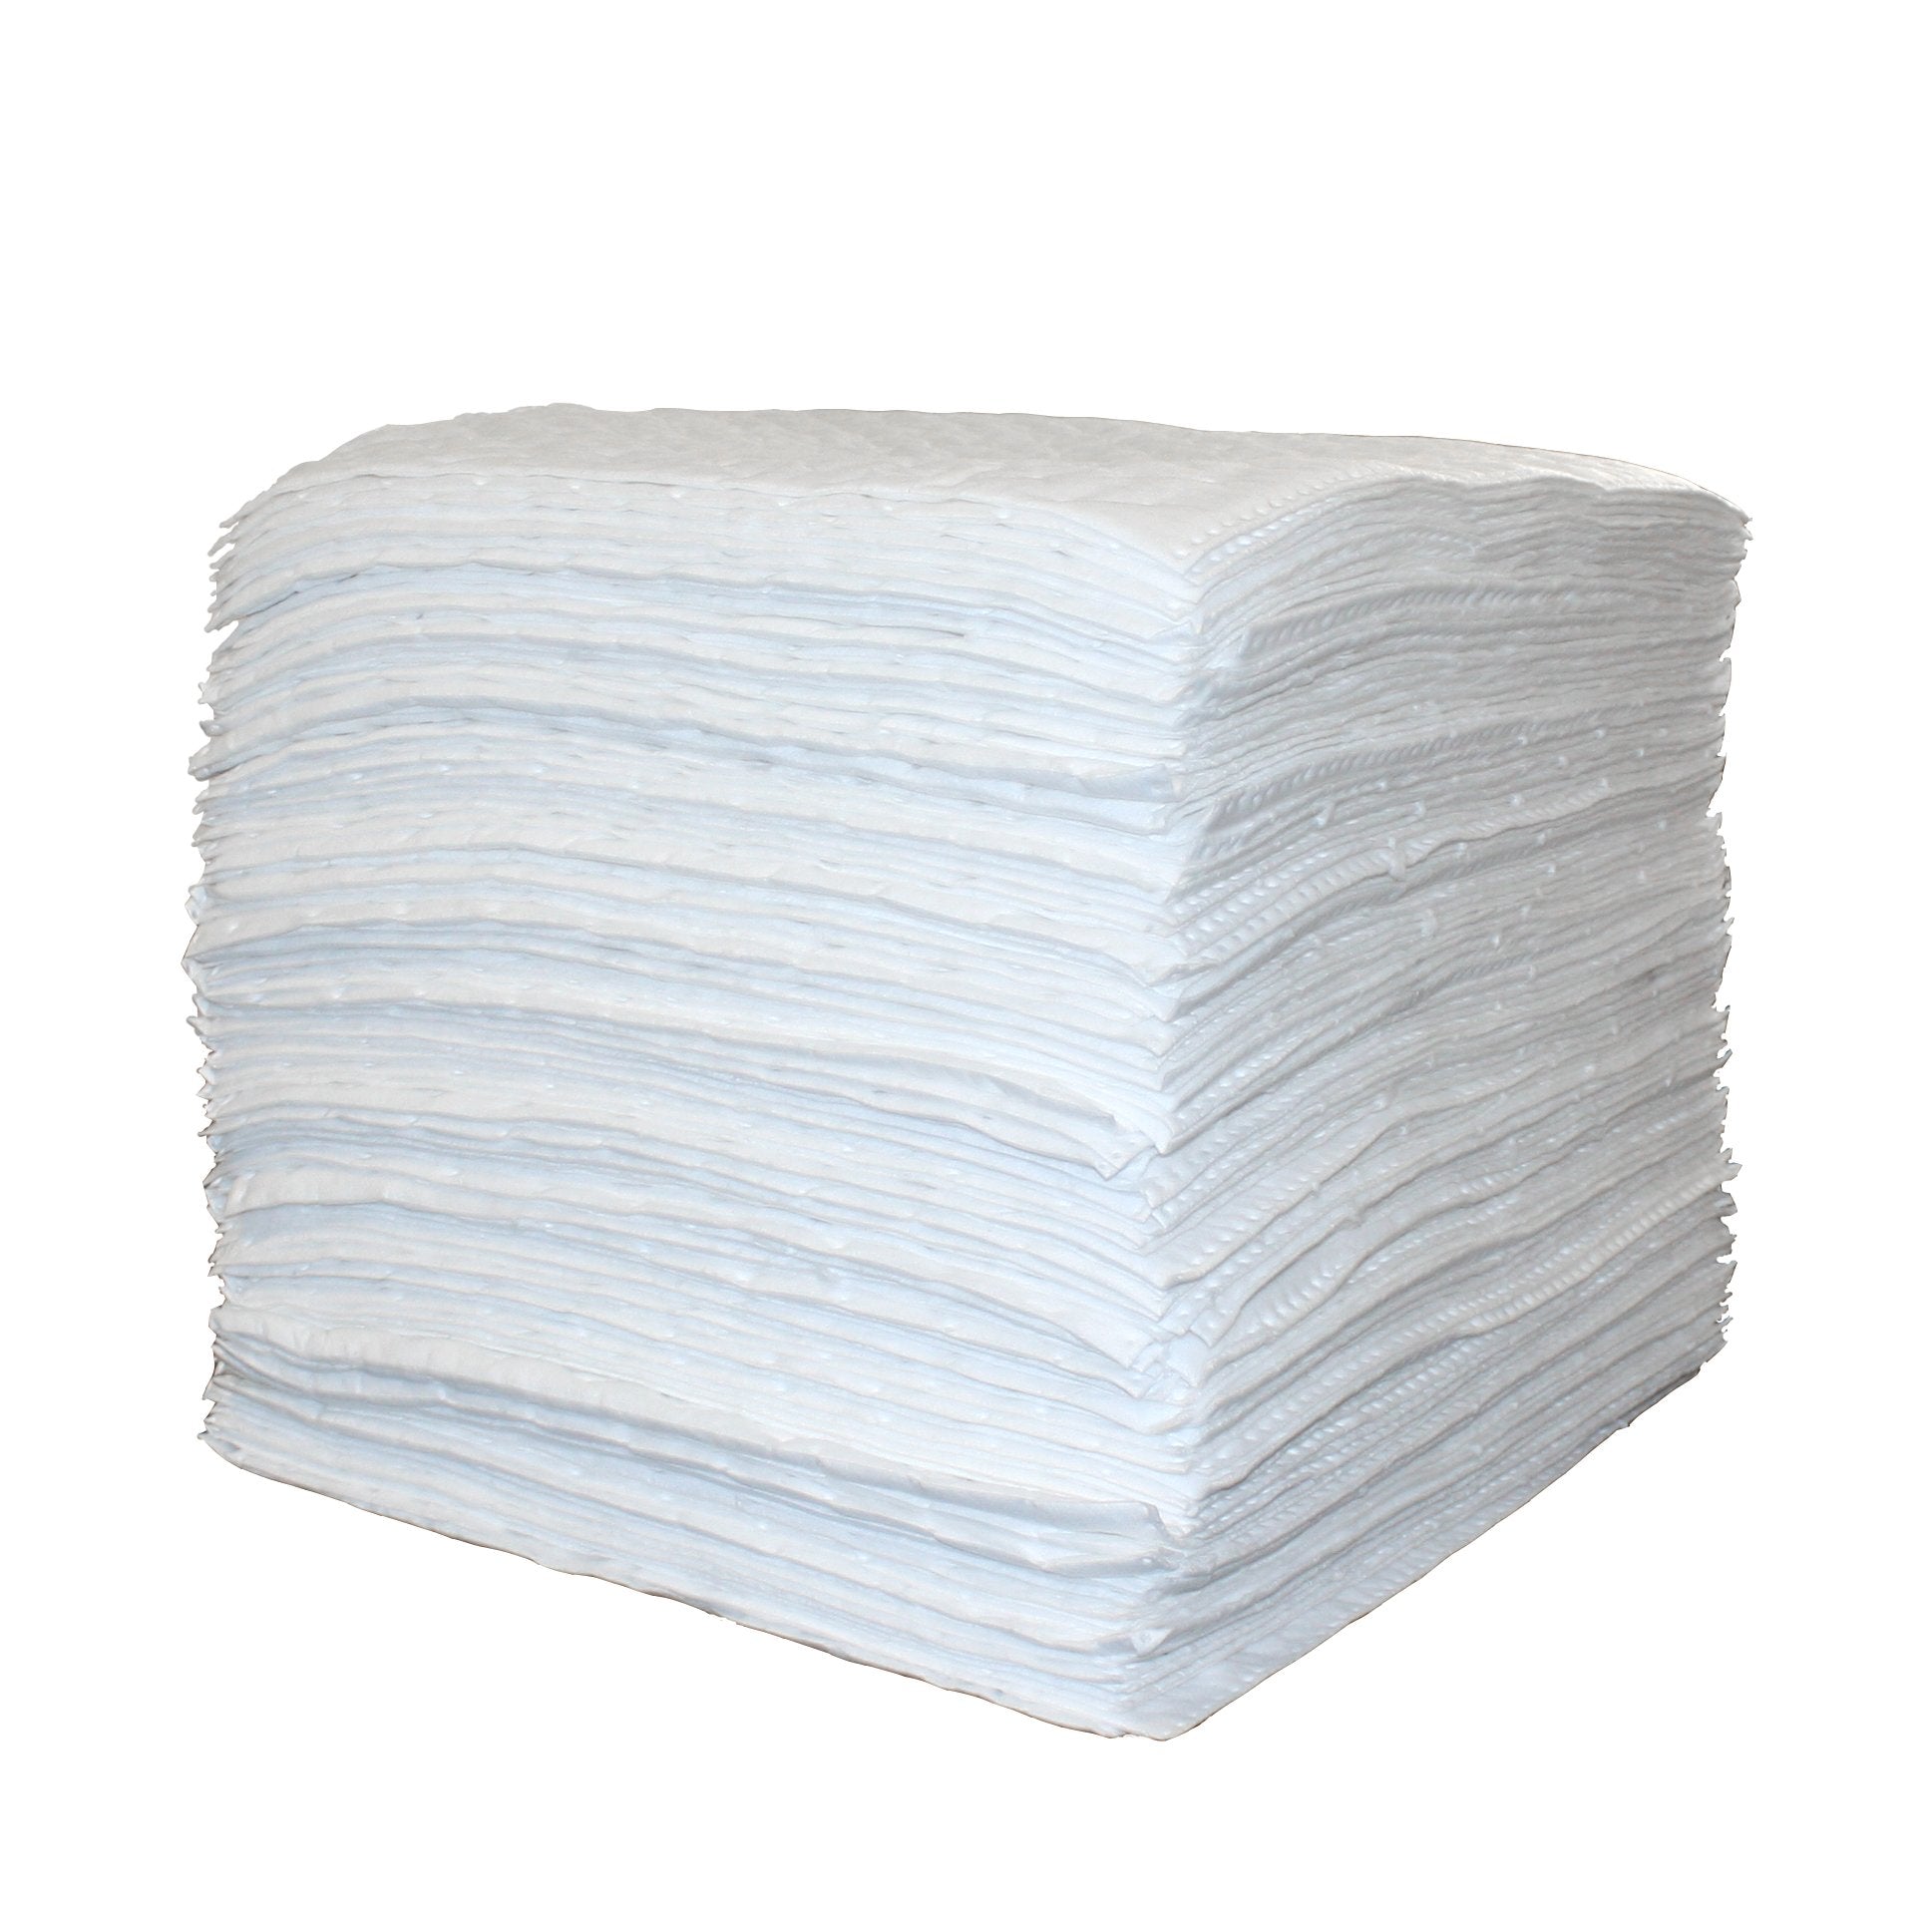 Recycled FiberDuck Oil-Only Heavy-weight Absorbent Pads - 100/BALE